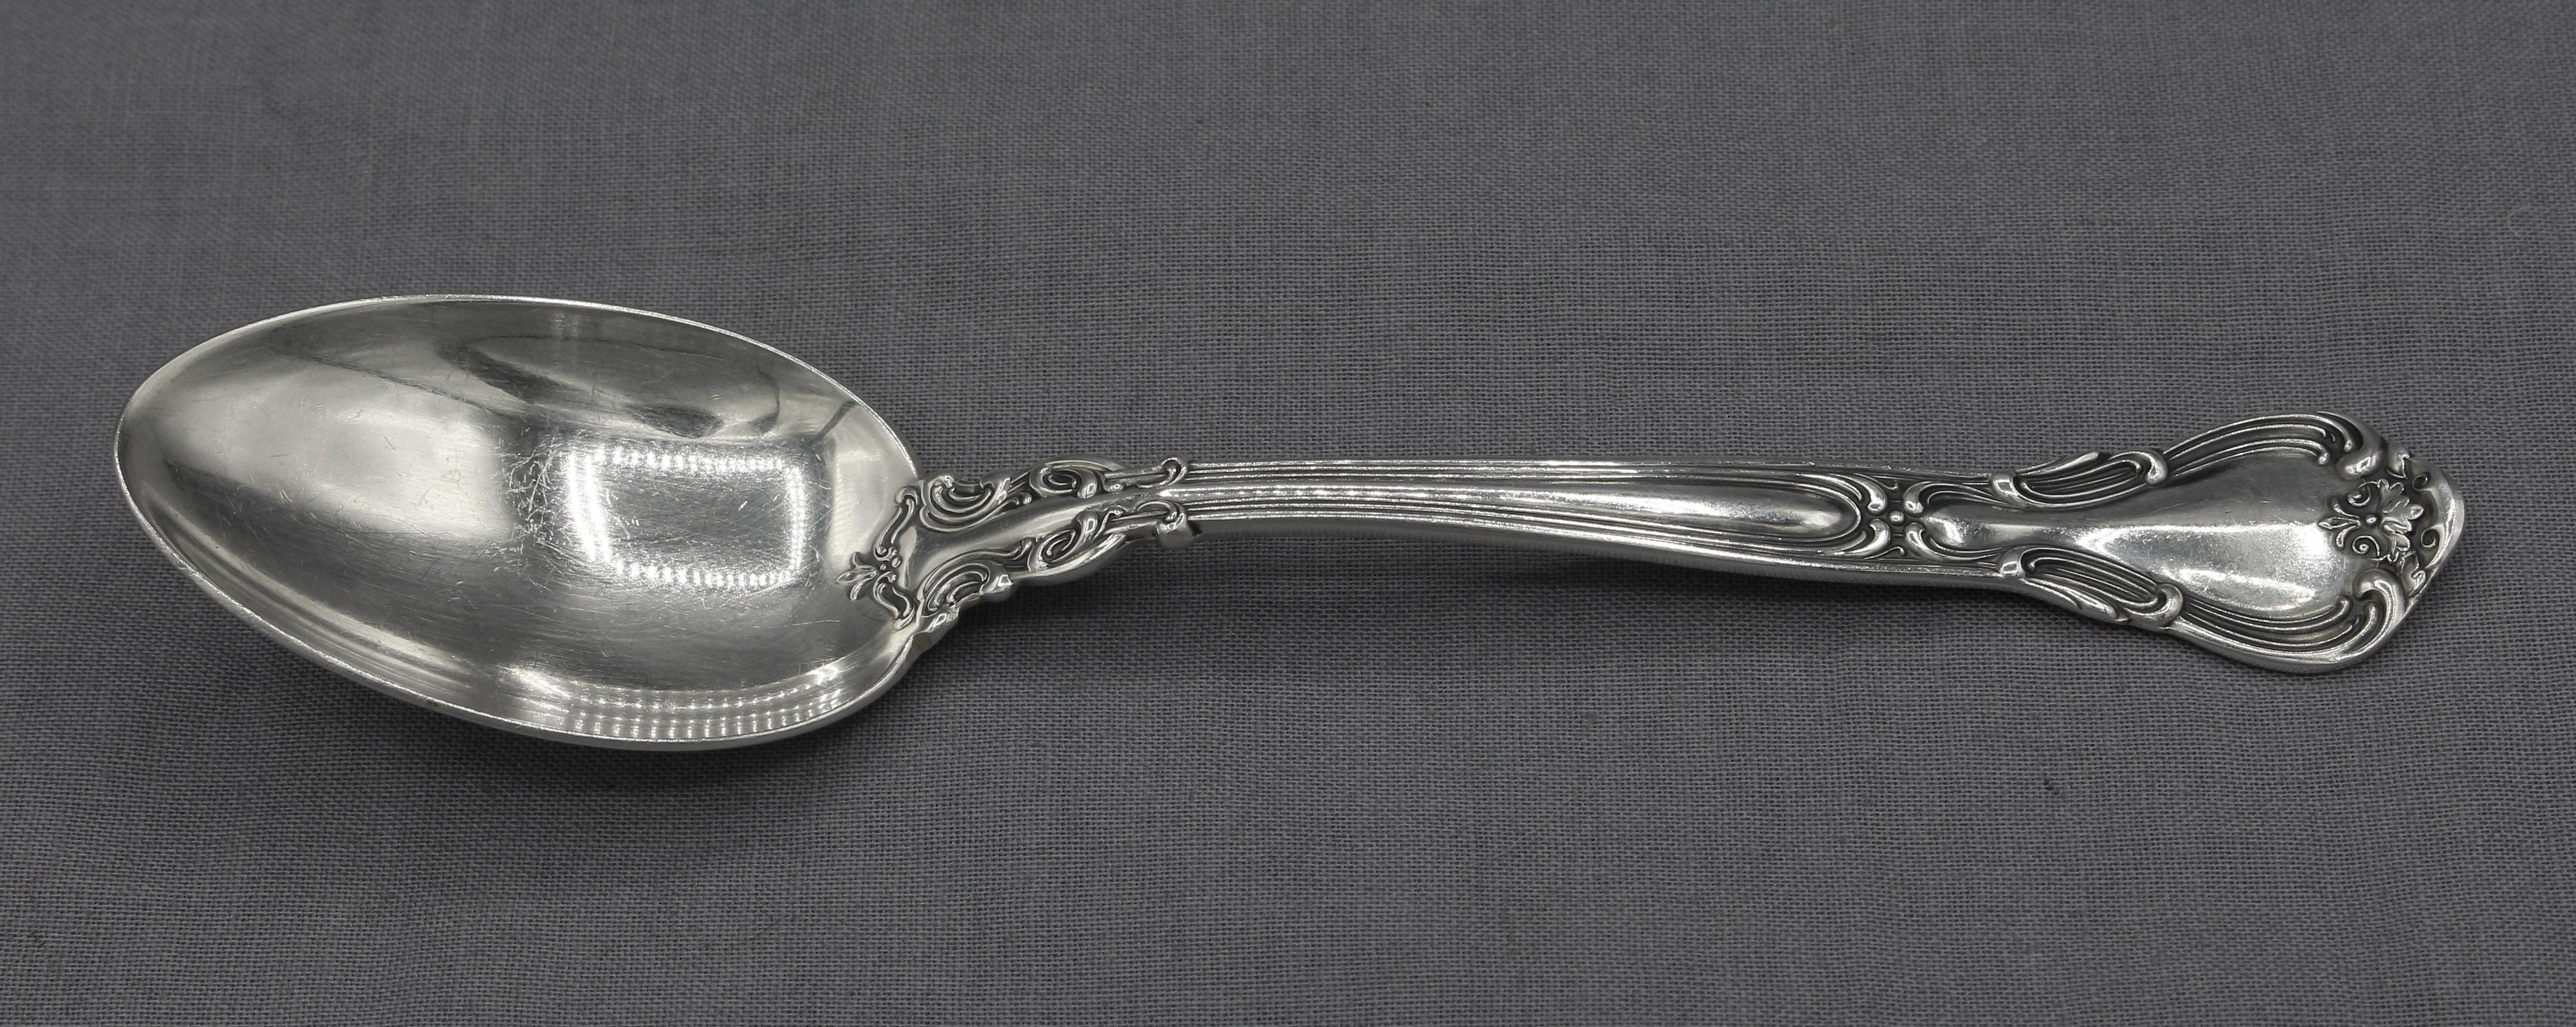 Set of 12 Chantilly sterling silver teaspoons by Gorham, c.1950-70s. Marked Gorham & Sterling. Never monogramed. 11.55 troy oz.
5.75